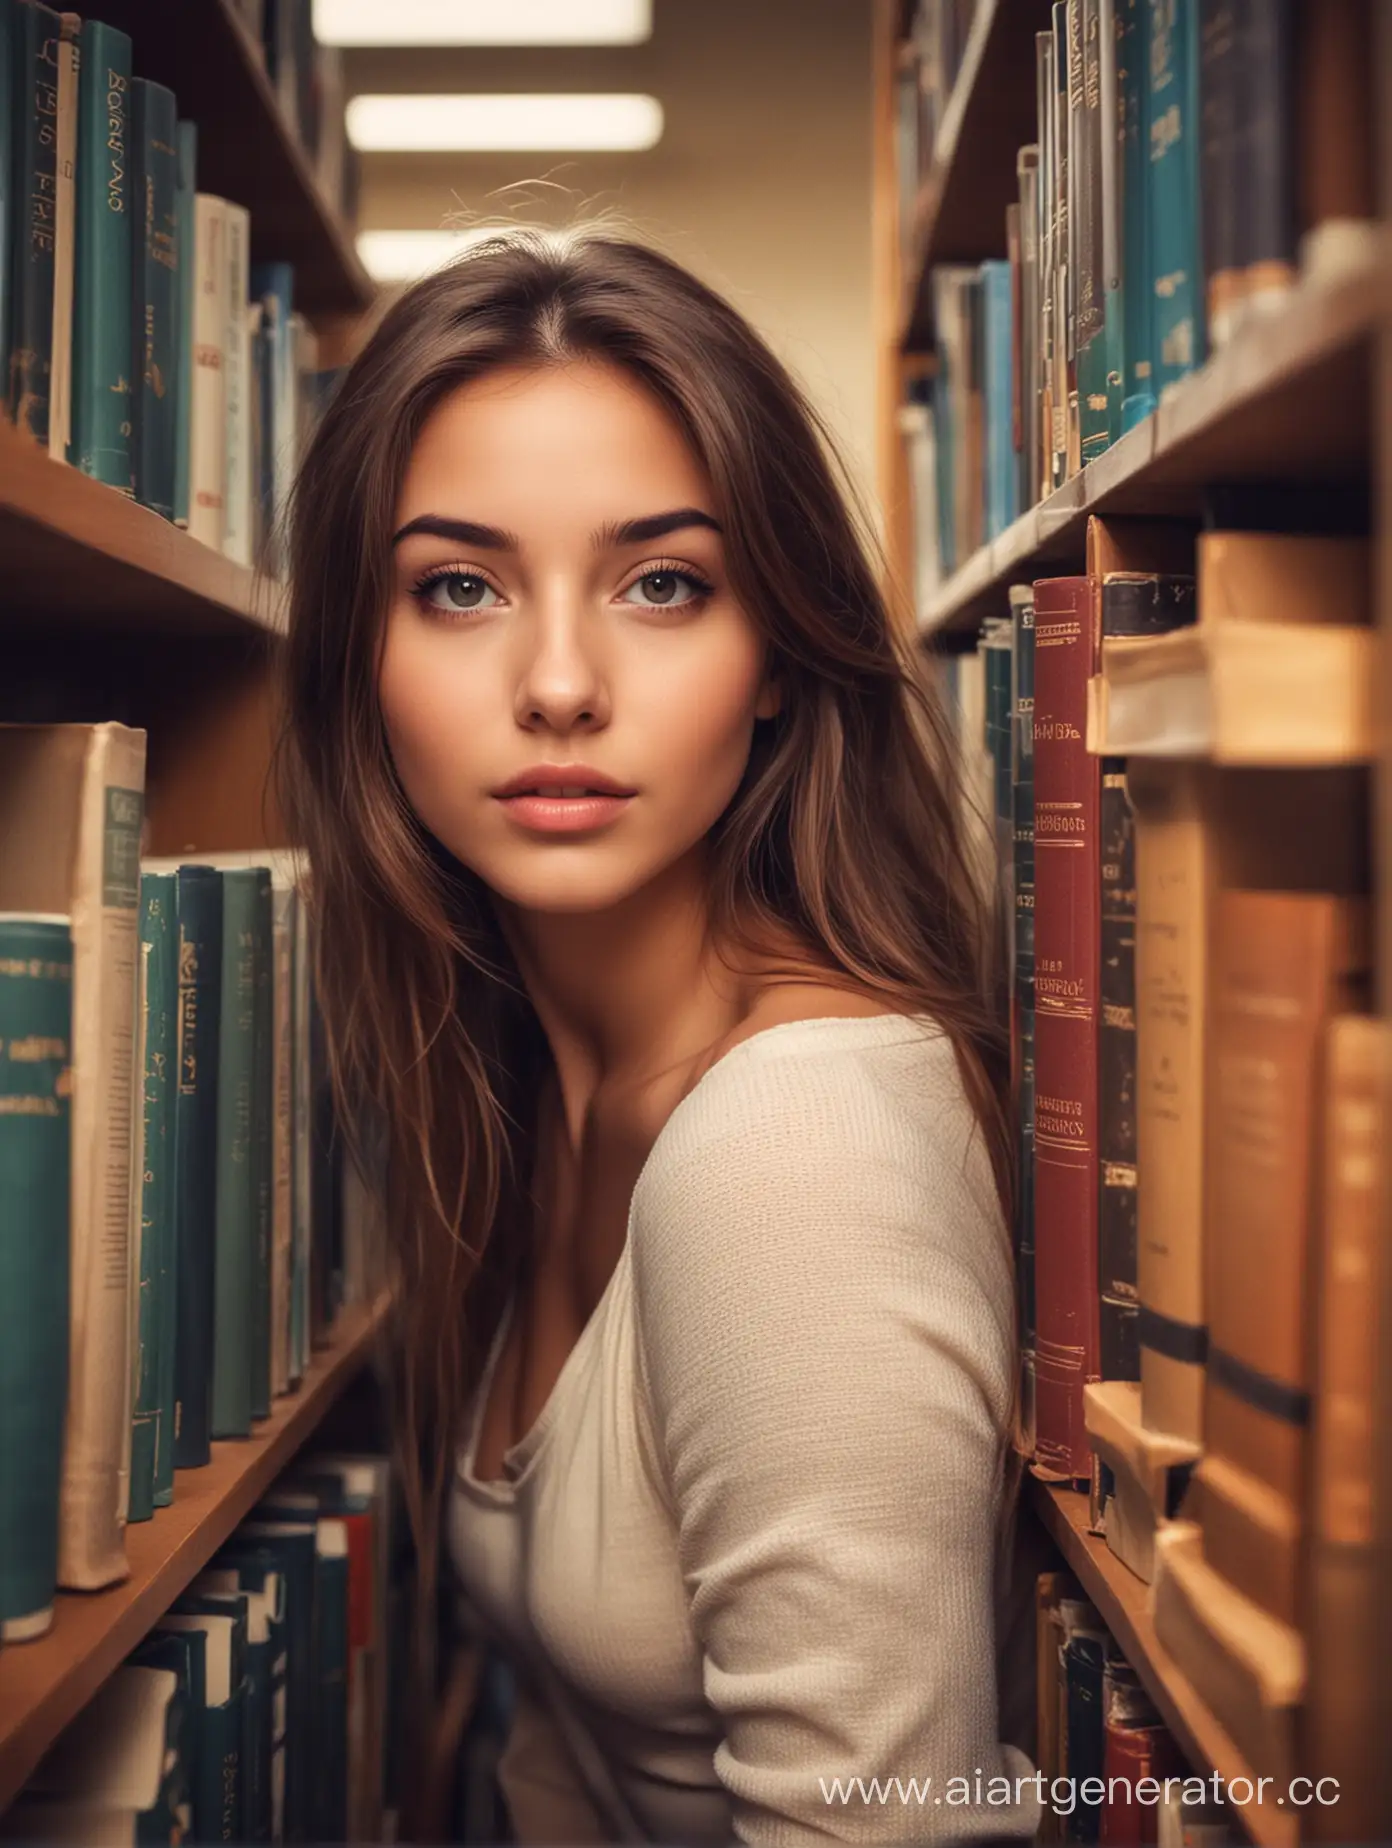 Curious-Girl-Exploring-Library-Books